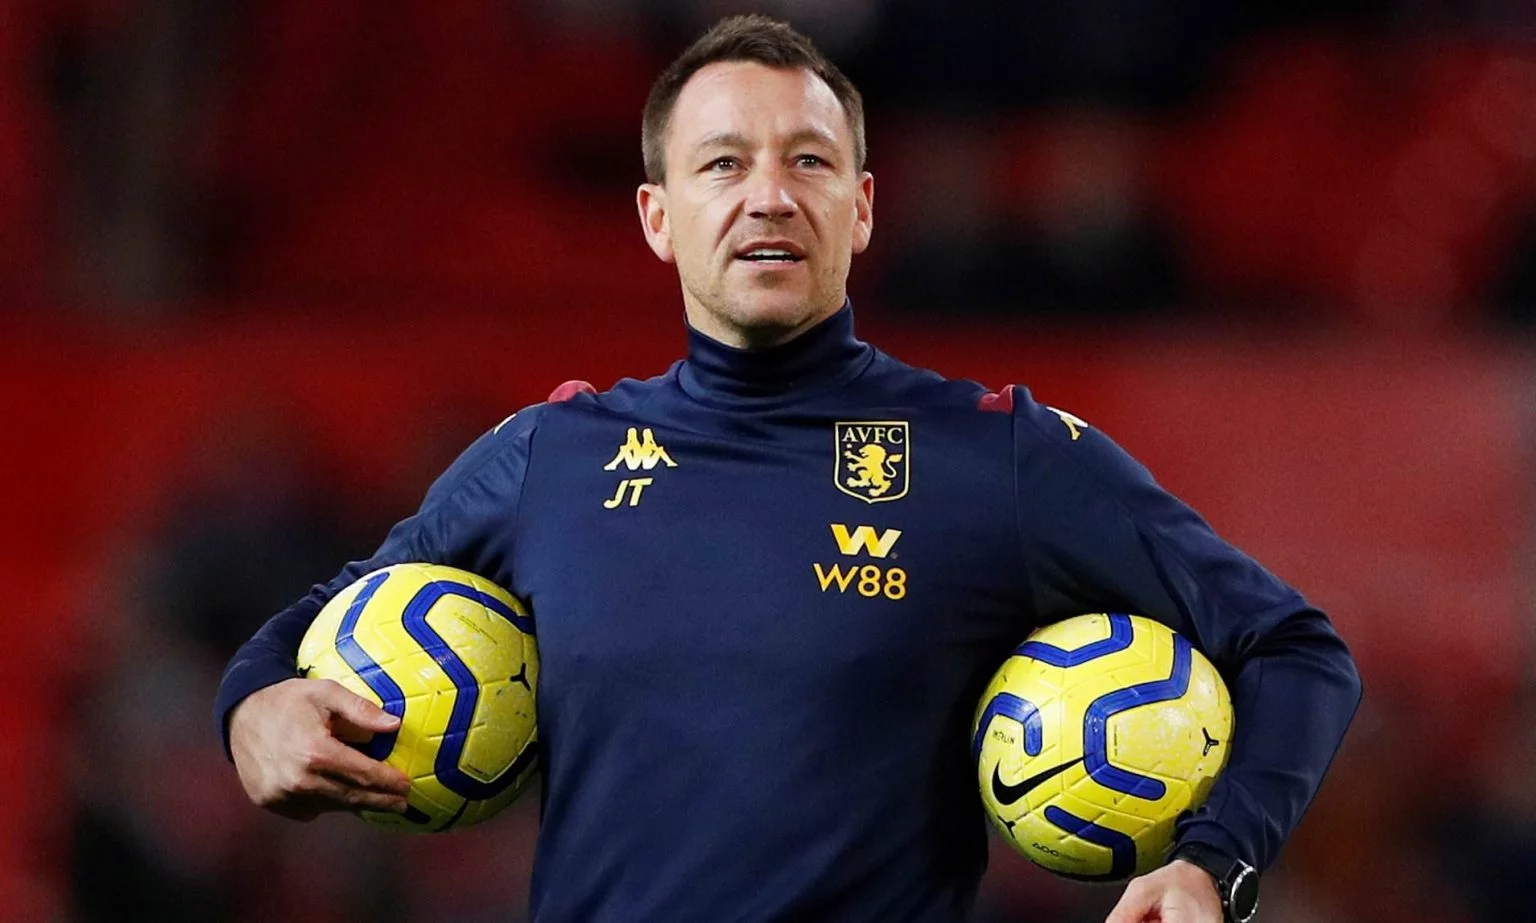 What John Terry has to say to Lampard on Chelsea return